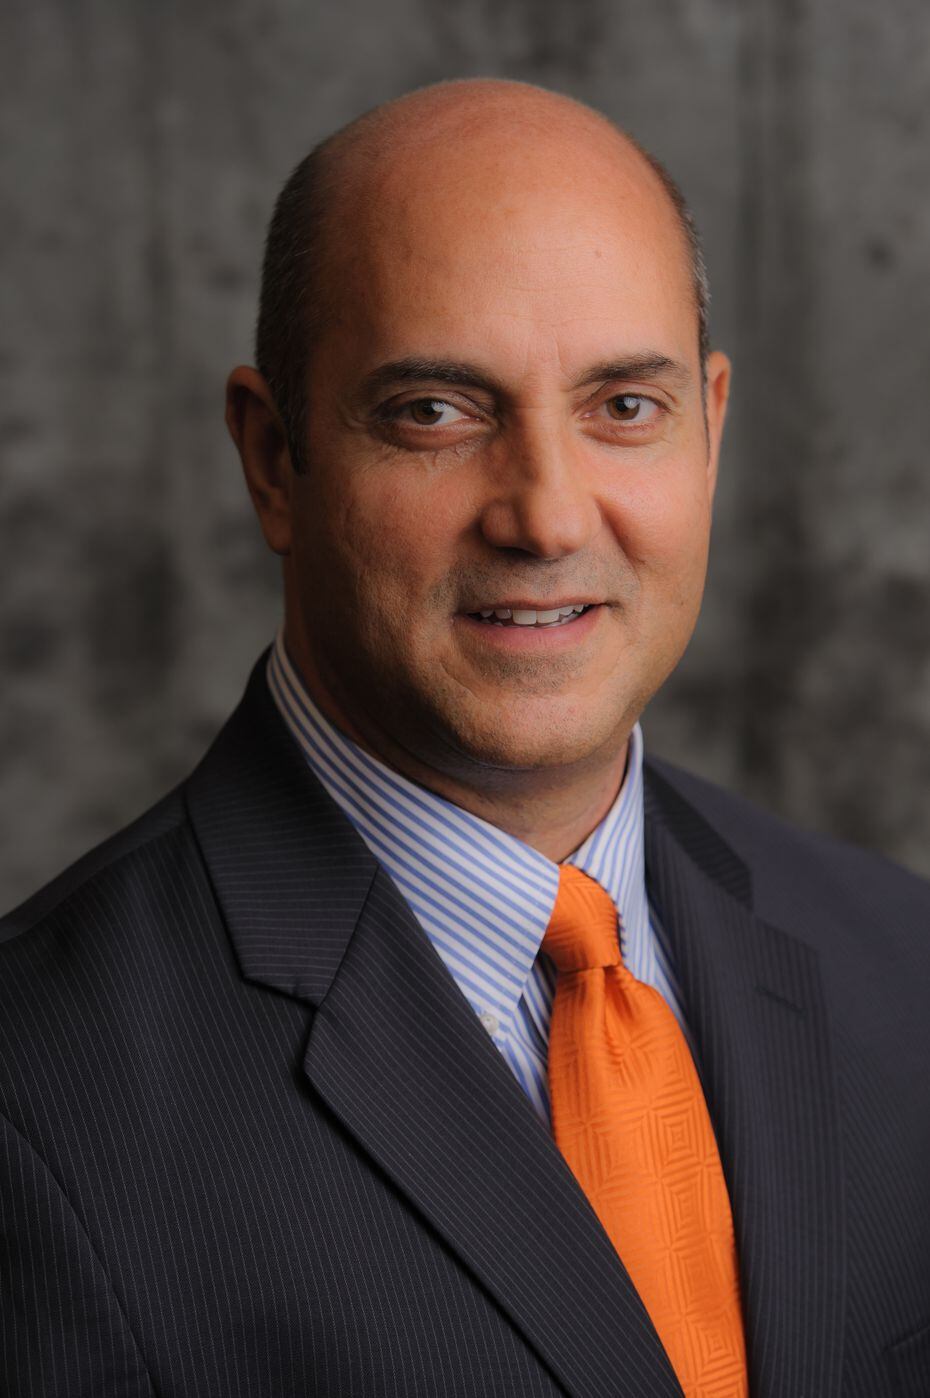 Michael Colaneri, AT&T's vice president of global business in retail and enterprise solutions